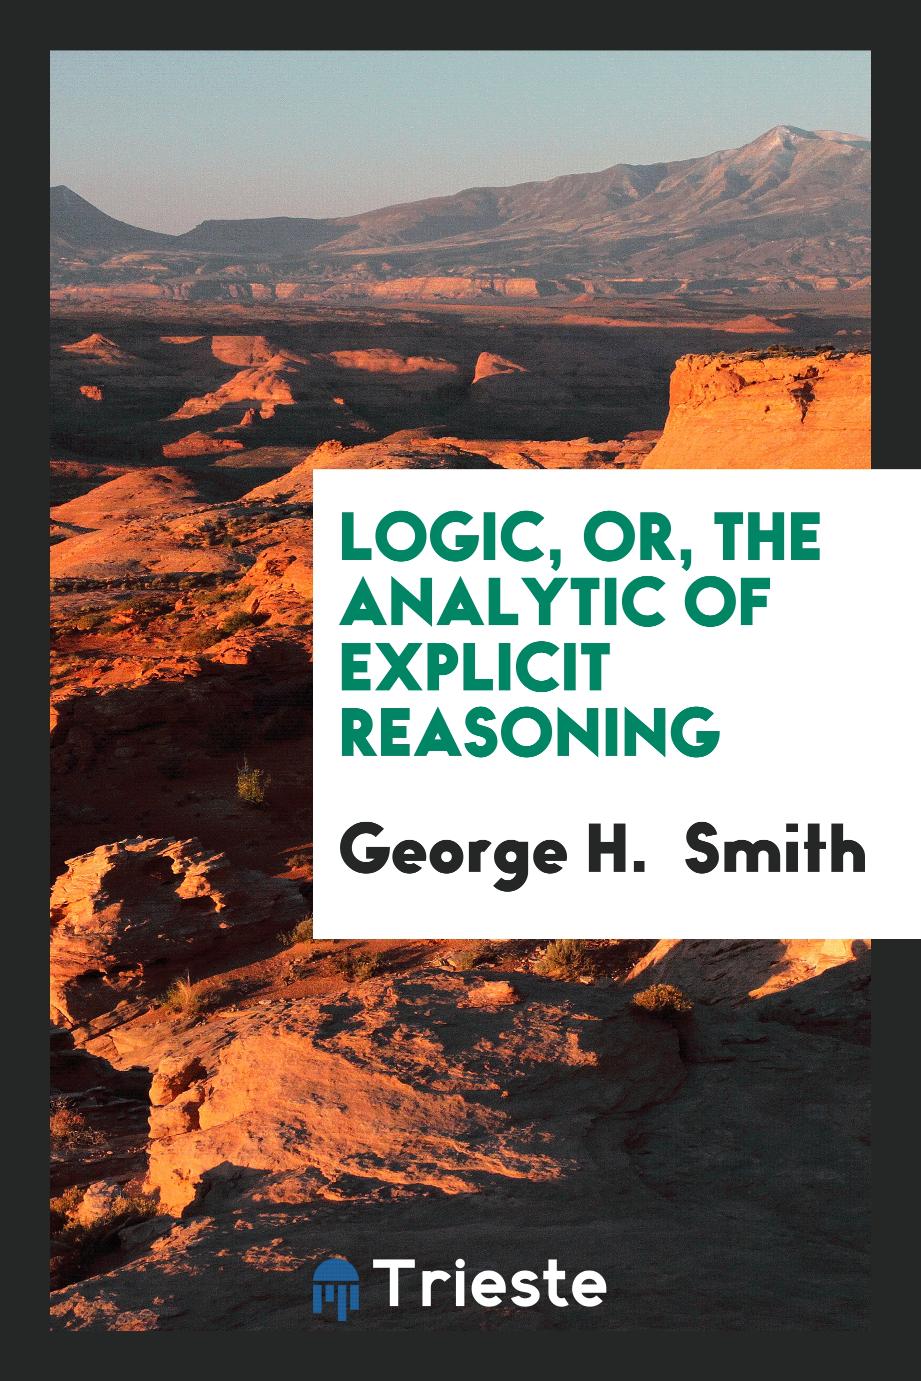 Logic, or, the Analytic of Explicit Reasoning